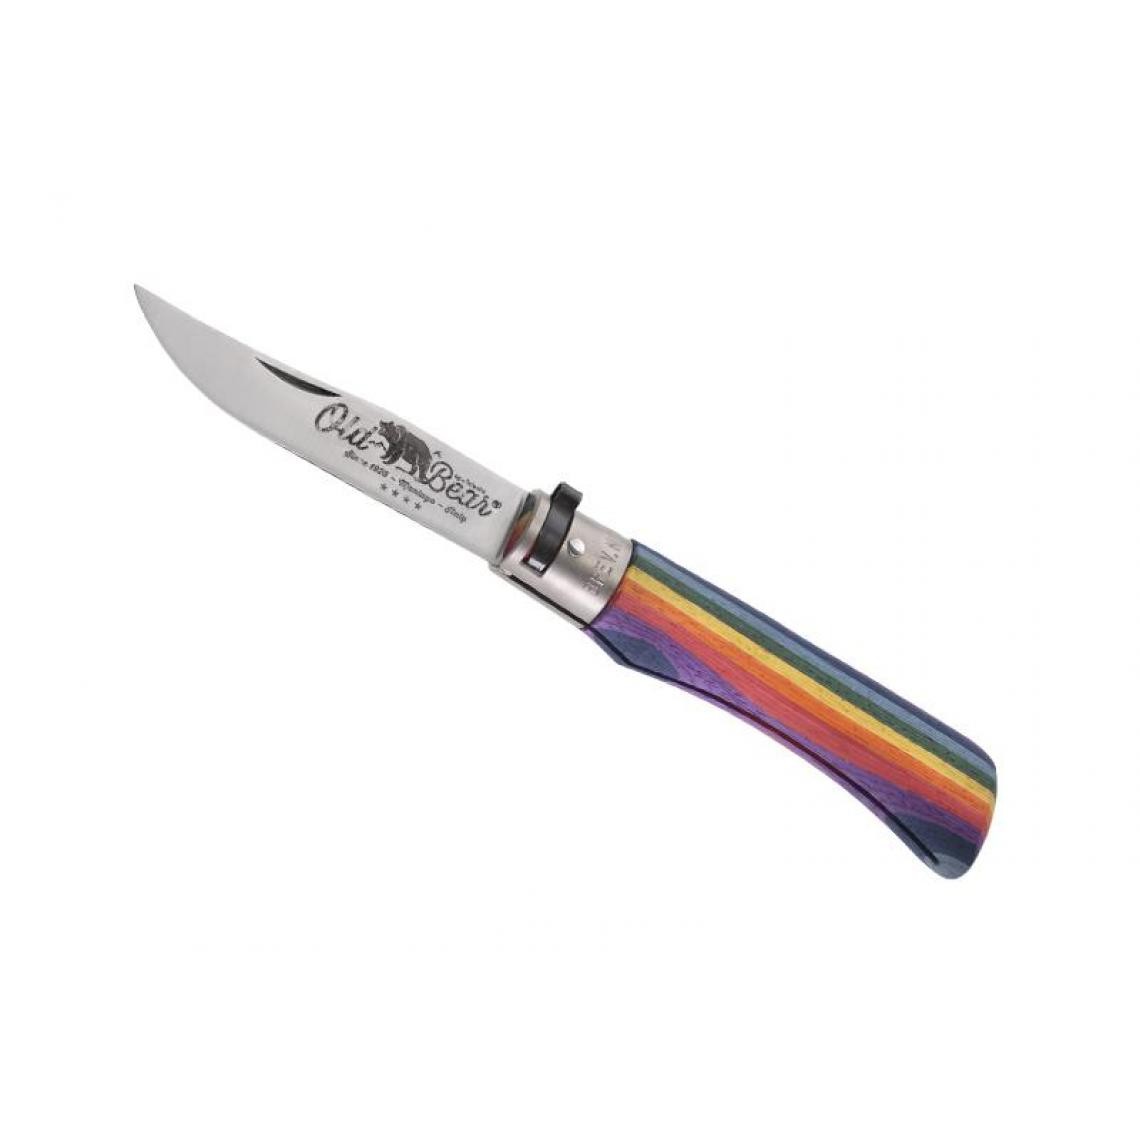 Divers Marques - OLD BEAR - 313.L - COUTEAU OLD BEAR RAINBOW TAILLE L - Outils de coupe